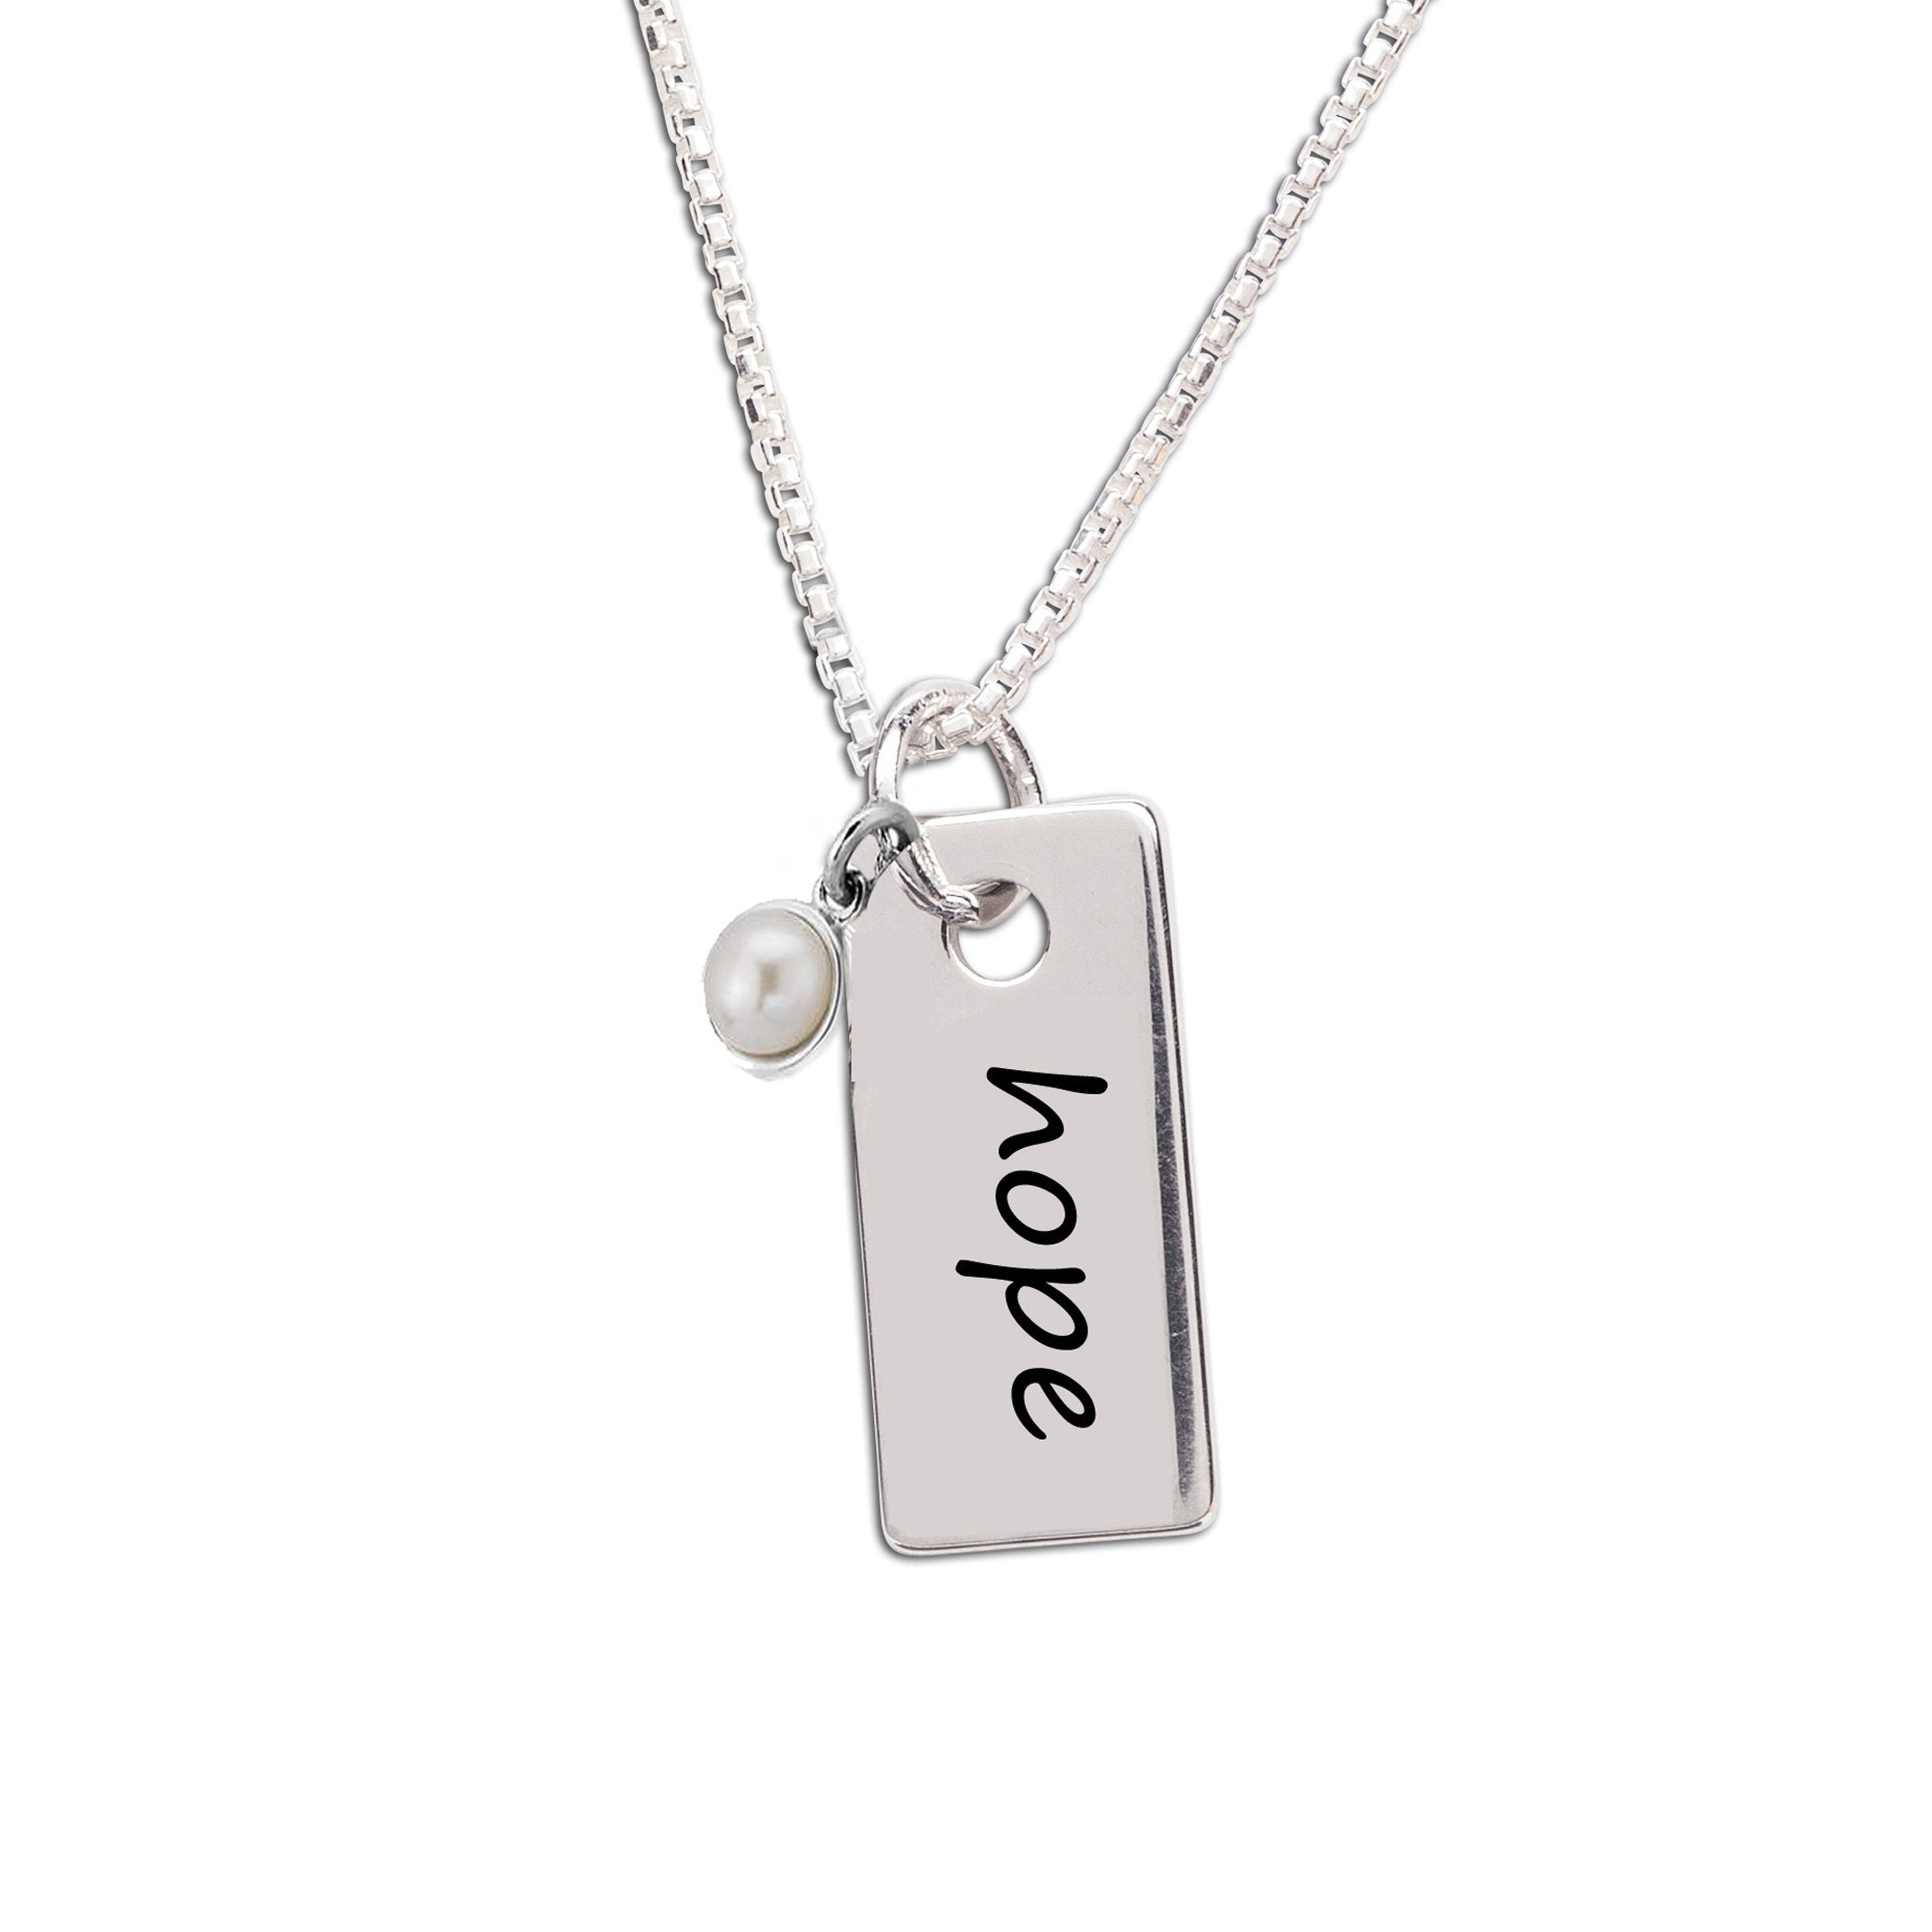 Cherished Moments- Sterling Silver Charm Necklaces